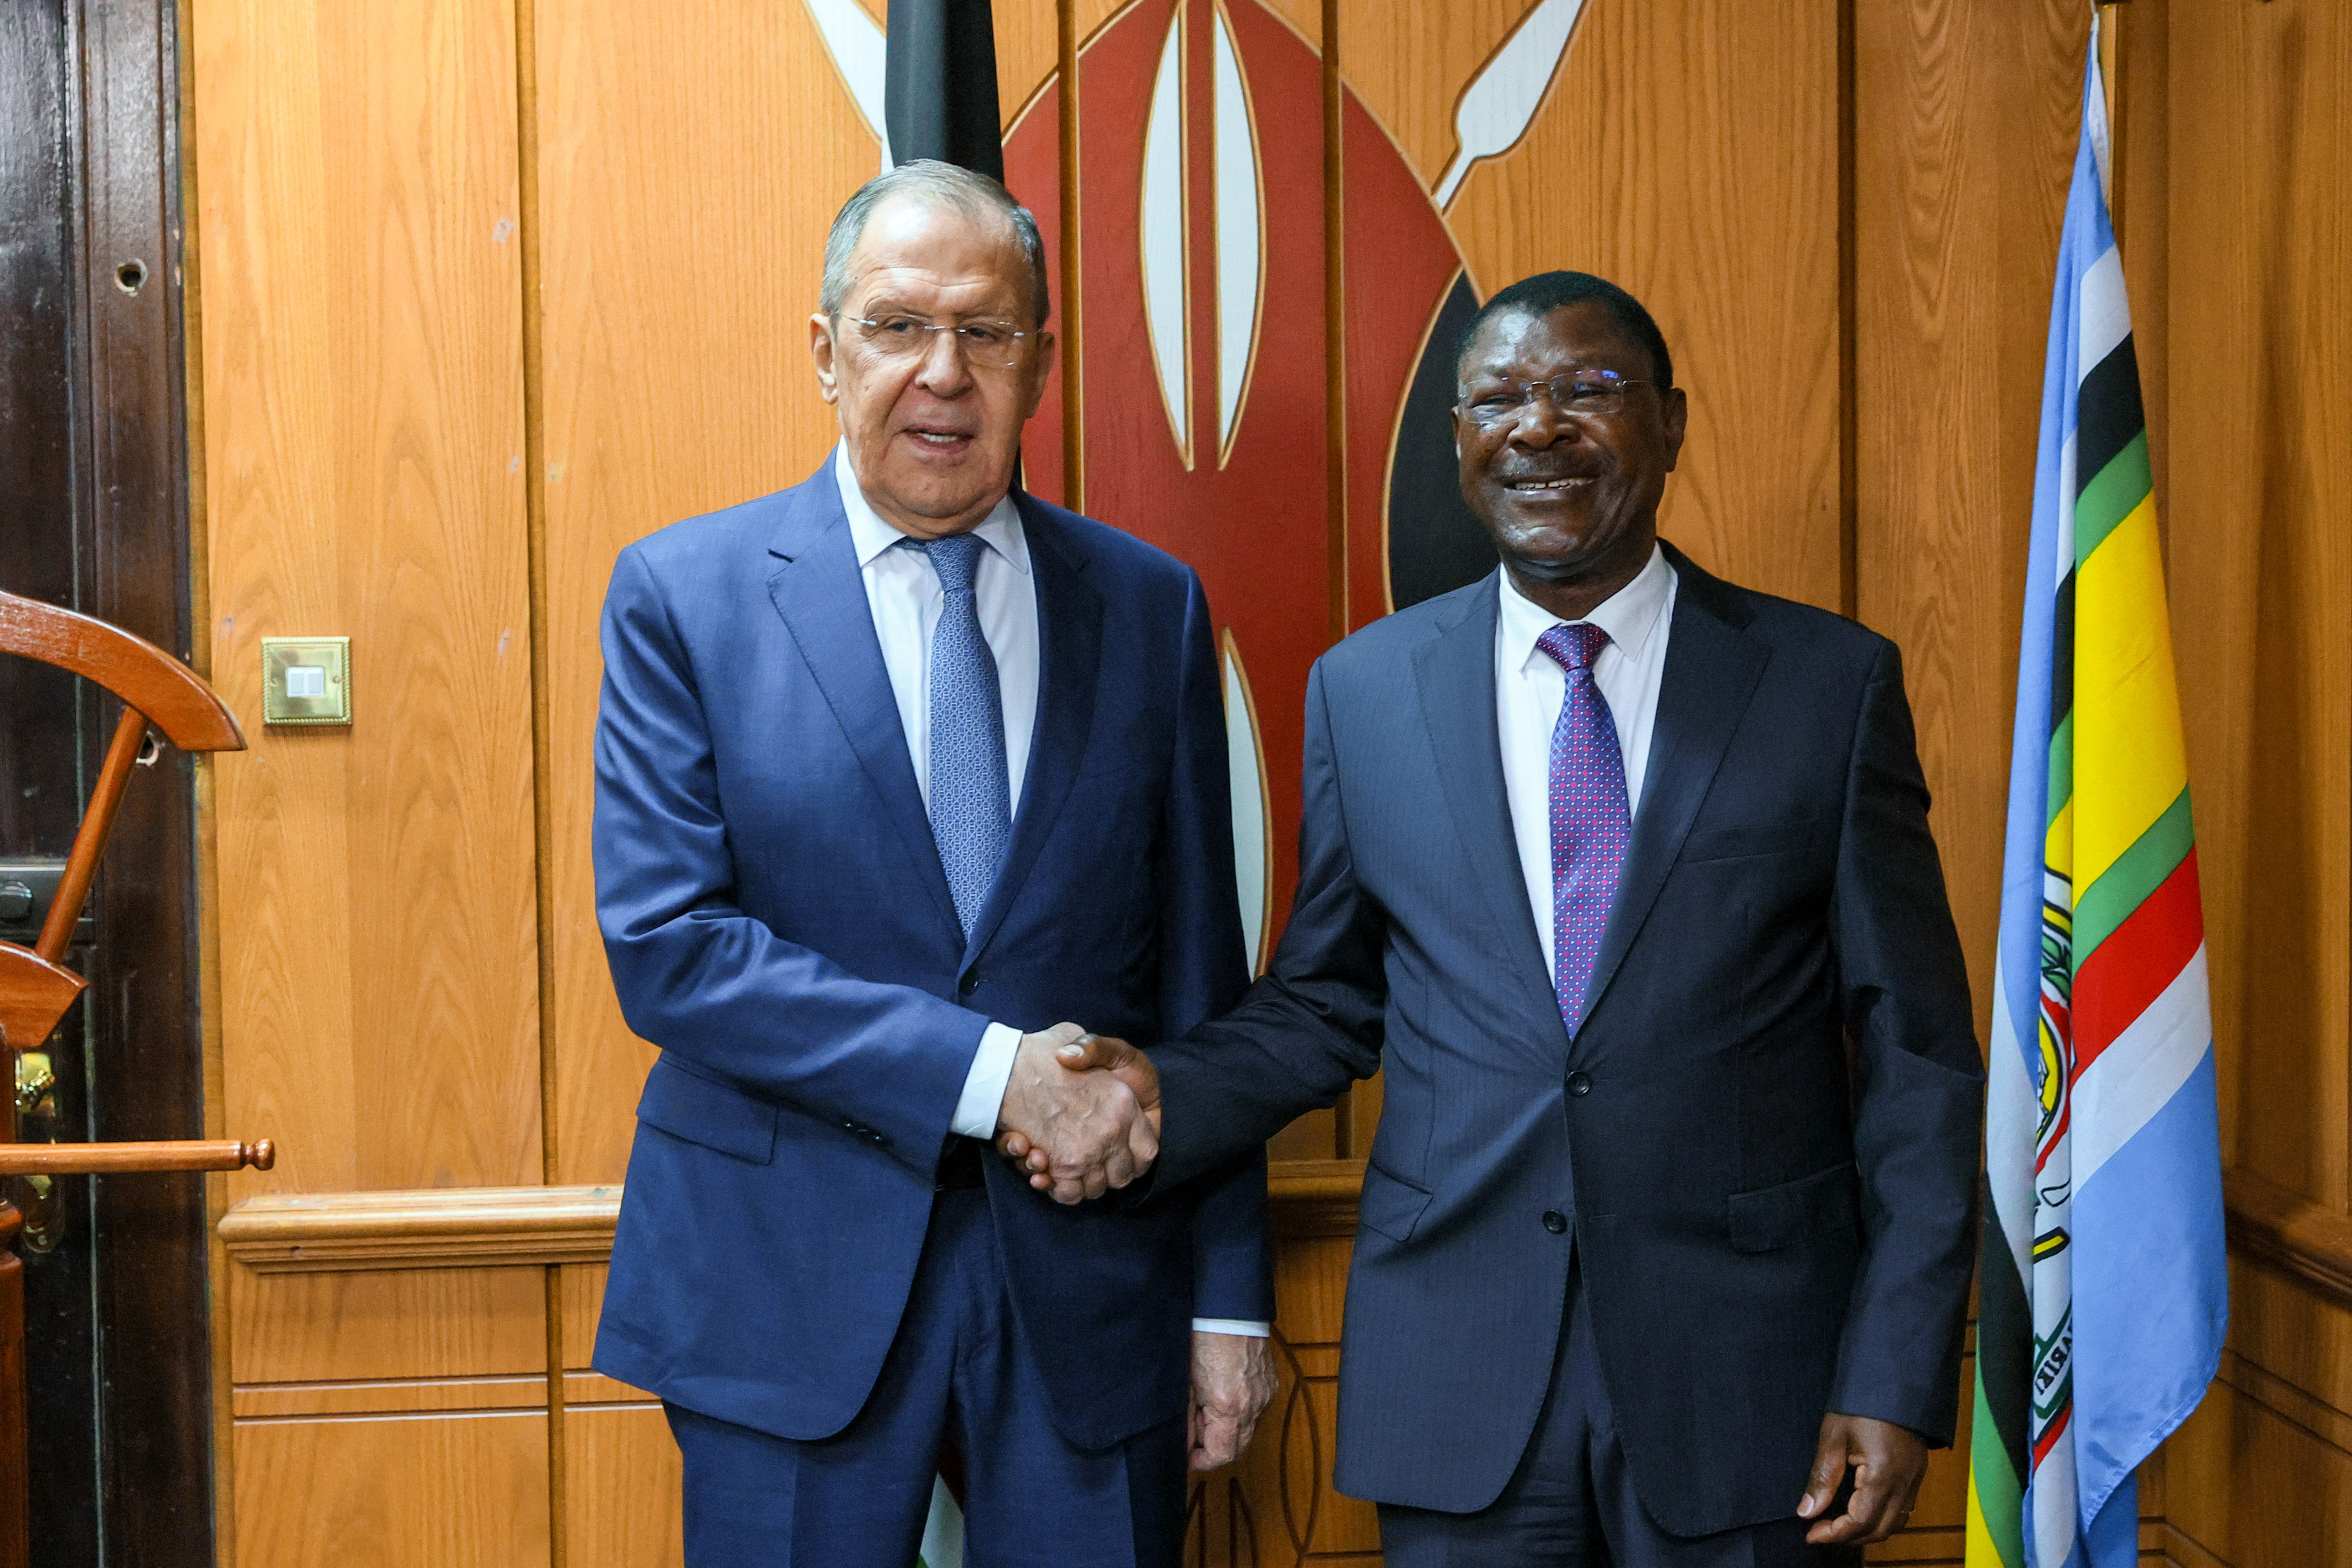 Russian Foreign Minister Sergei Lavrov visits Kenya